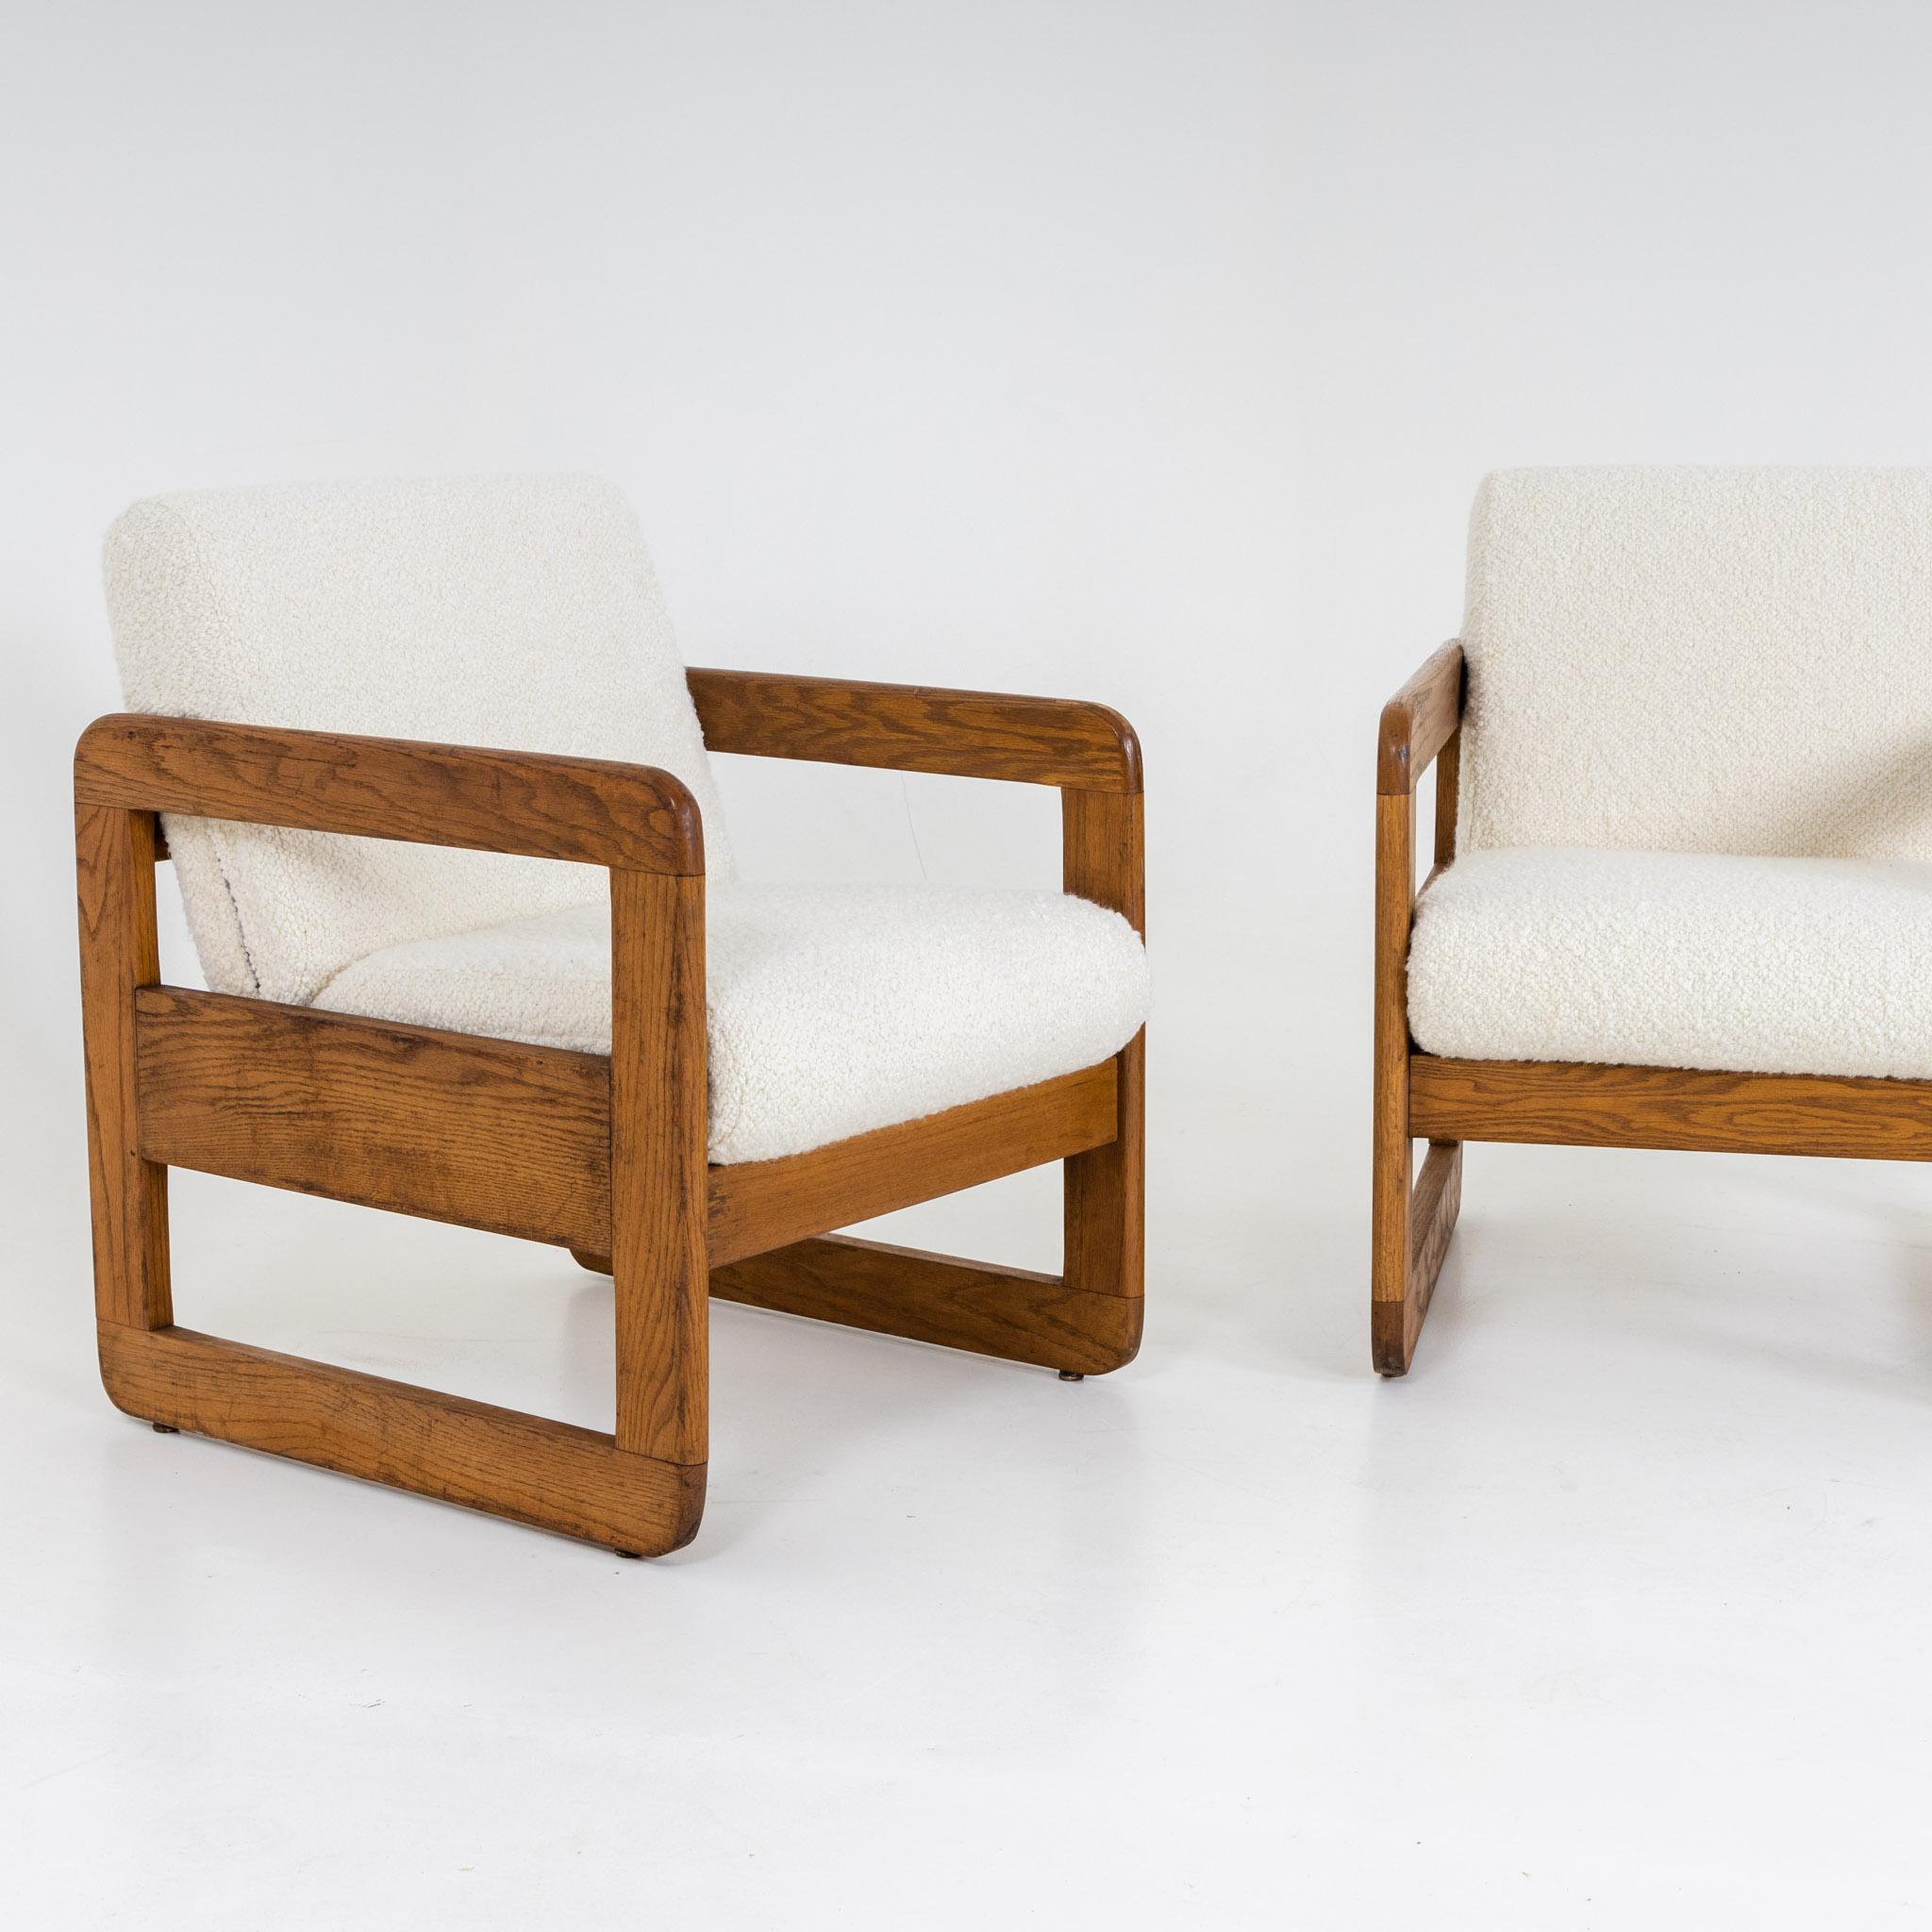 Pair of Thonet lounge chairs with frames in oak and seat cushions with white bouclé cover. Label on the bottom.